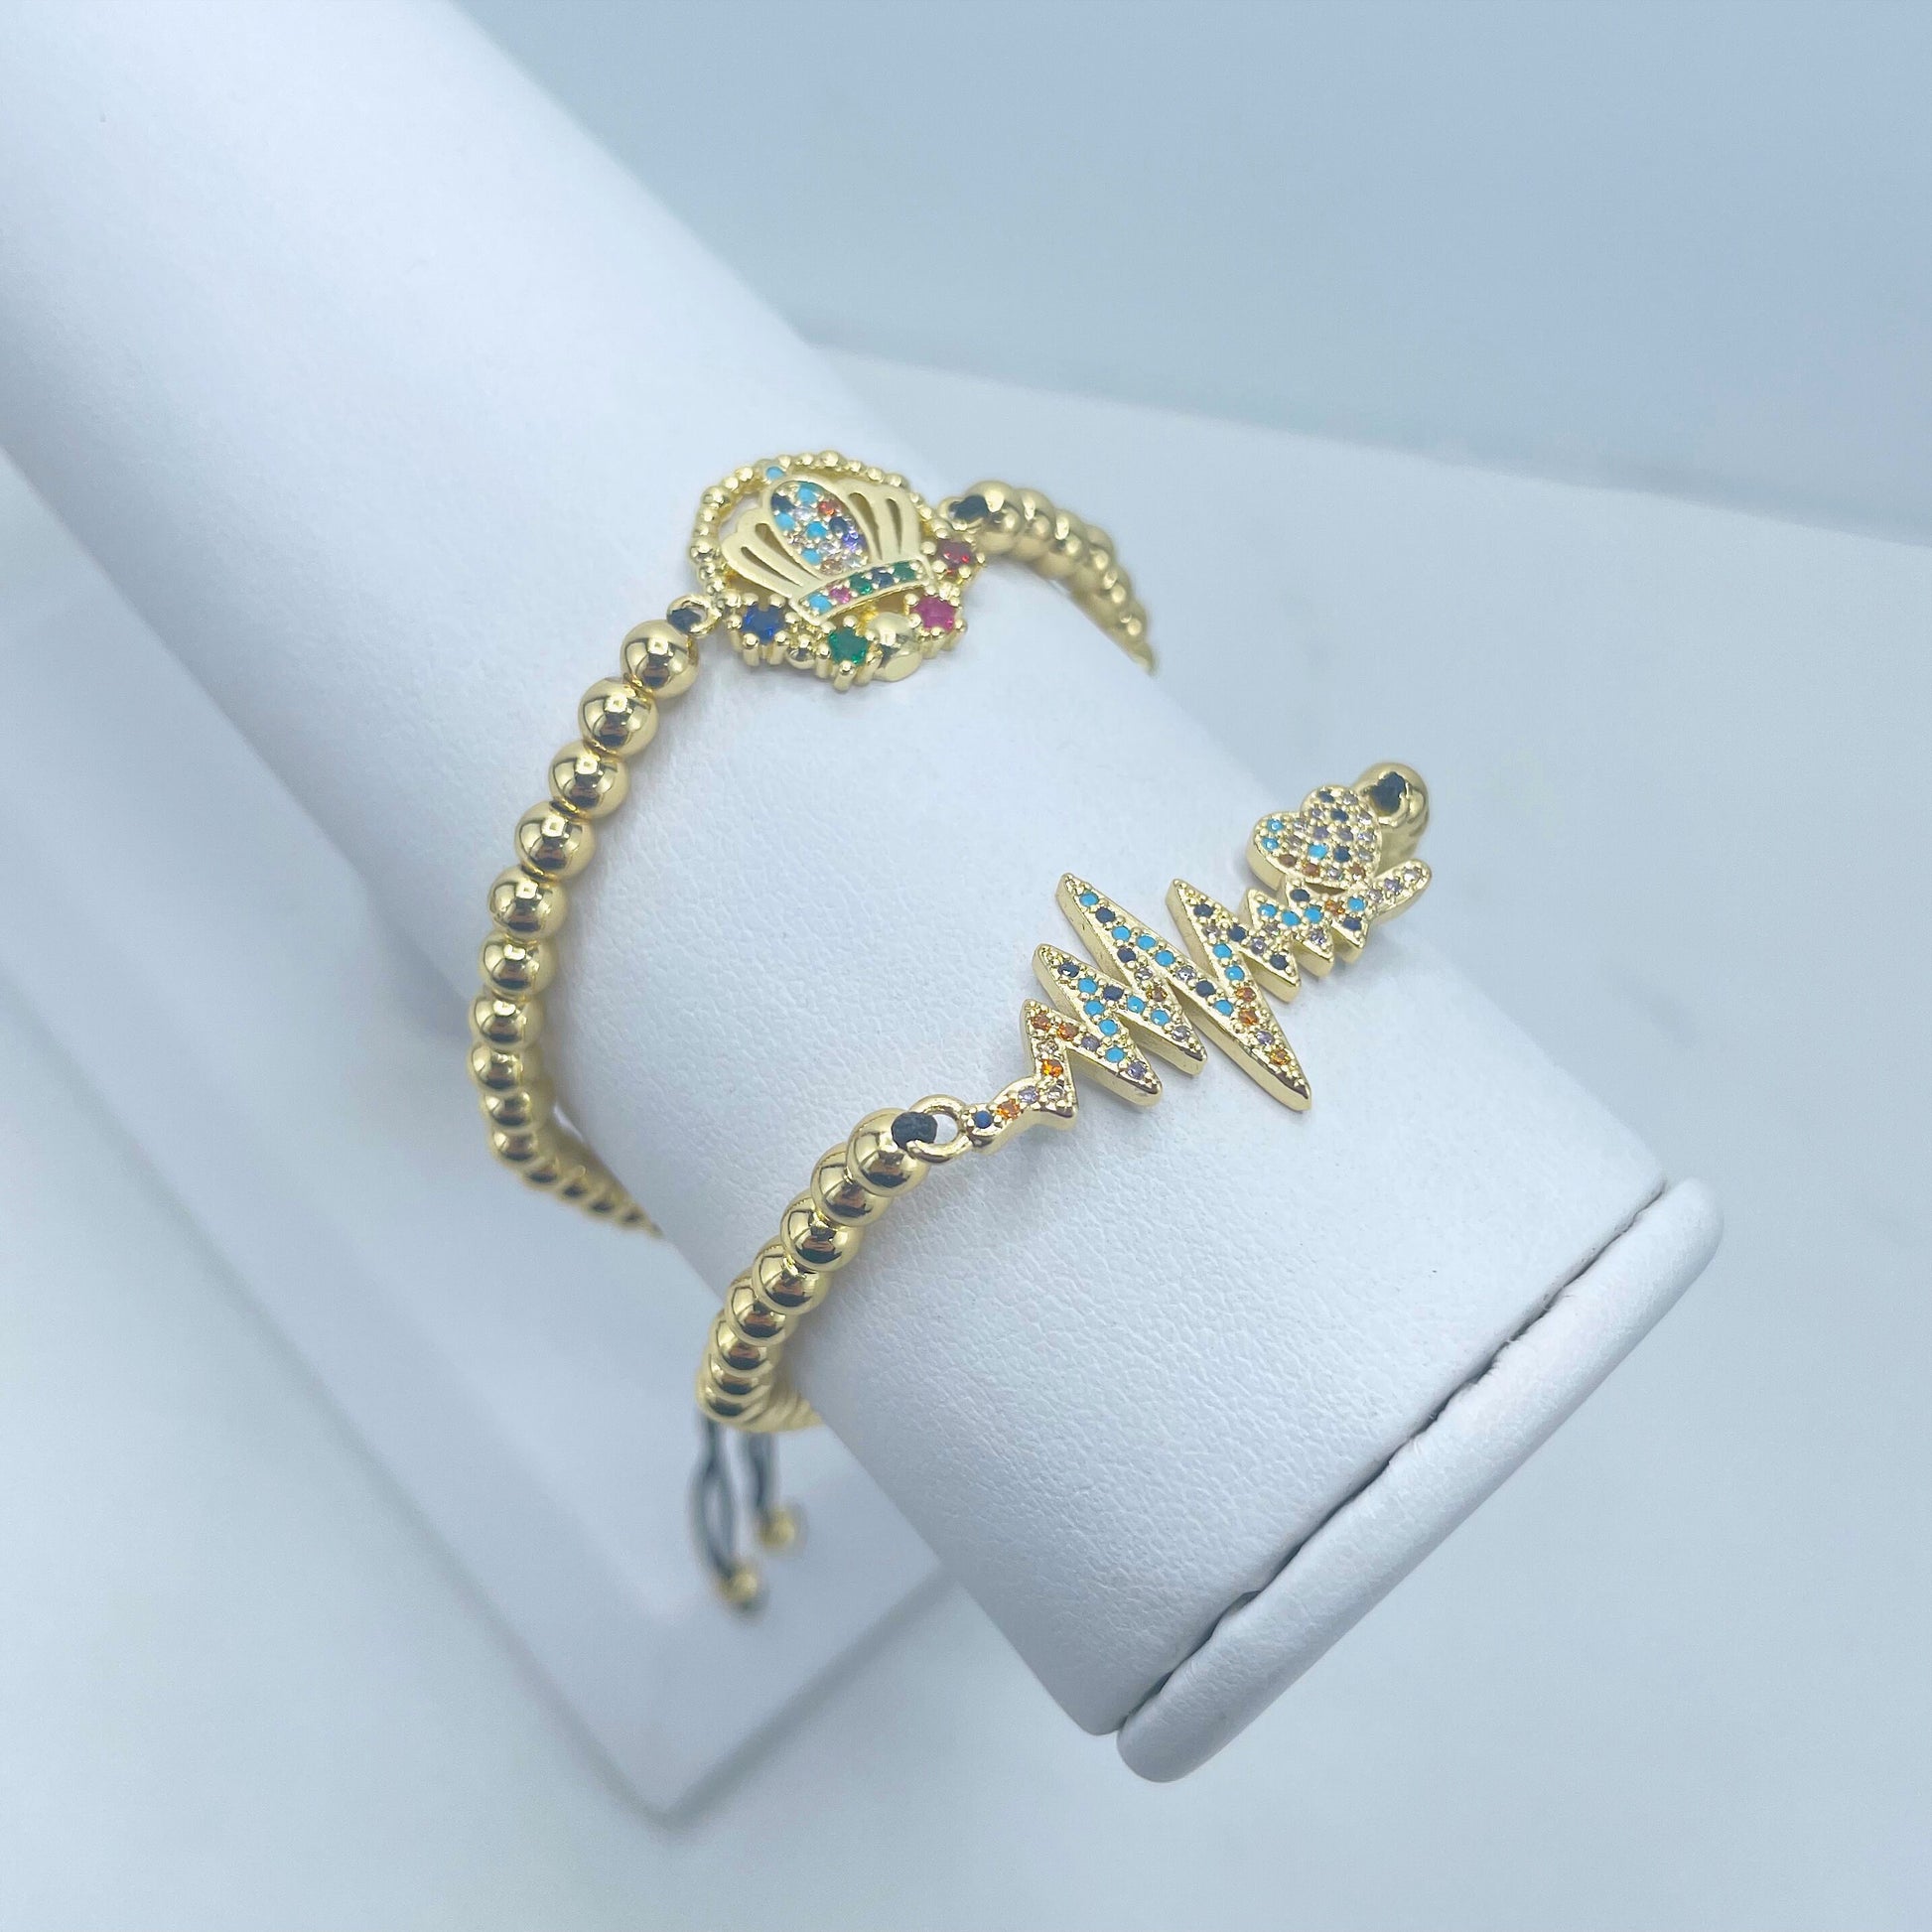 18k Gold Filled 3mm Gold Beads, Handmade Adjustable Bracelet with Colored Micro CZ, Heartbeat or Crown Charms, Wholesale Jewelry Supplies